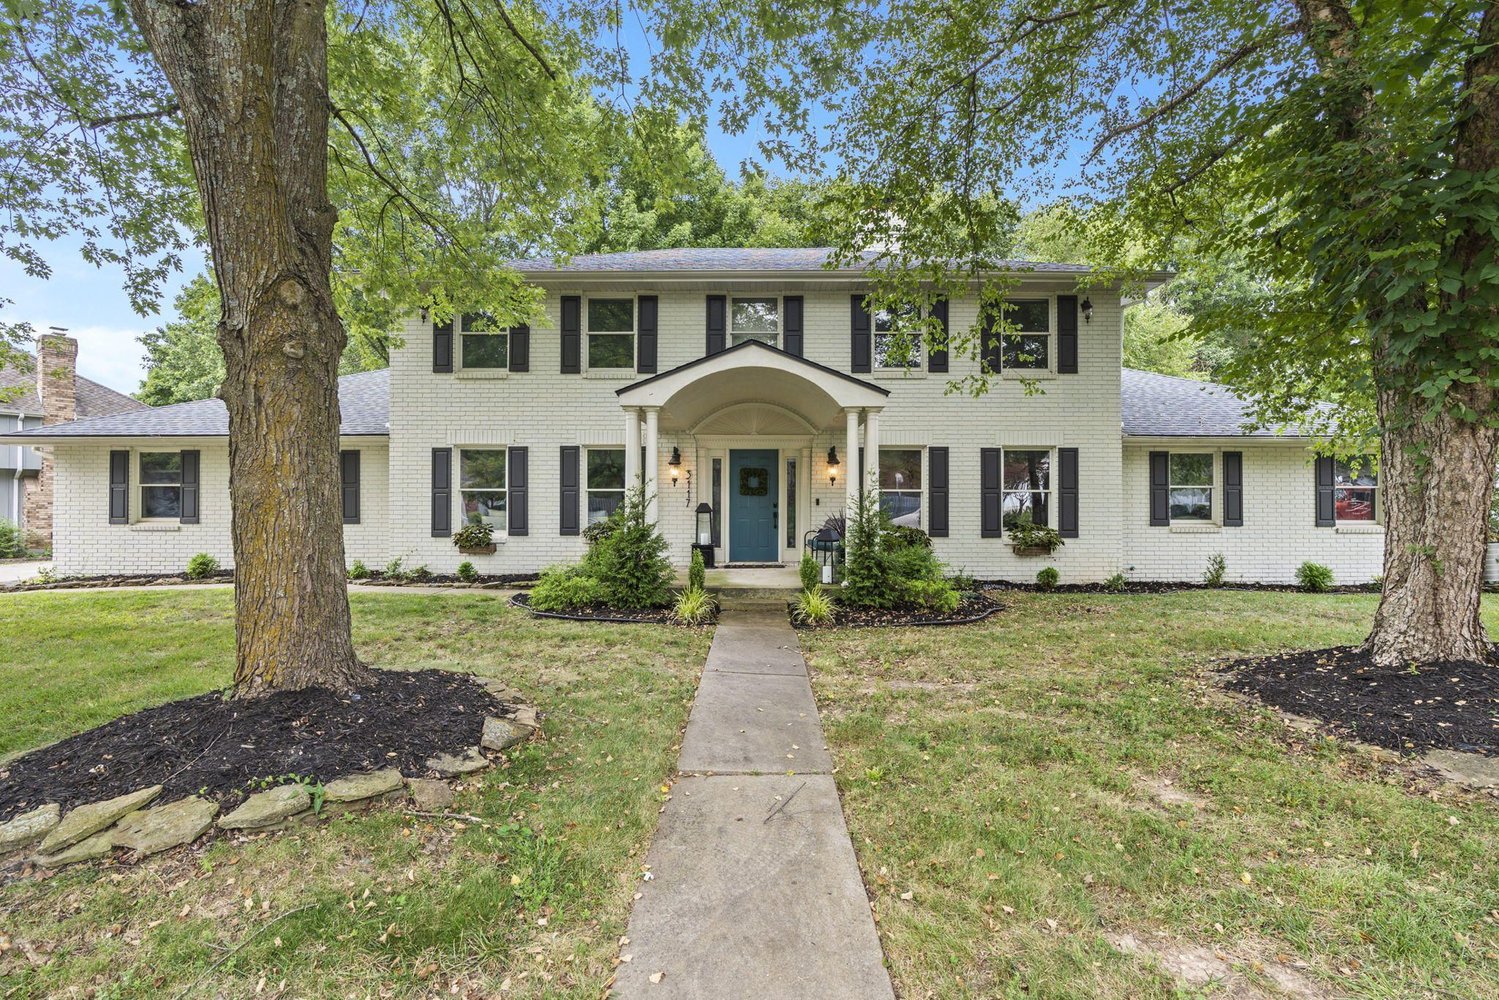 3117 S. Chambery Ave.
$525,000
Bedrooms: 6
Bathrooms: 5
Listing firm: Keller Williams Greater Springfield